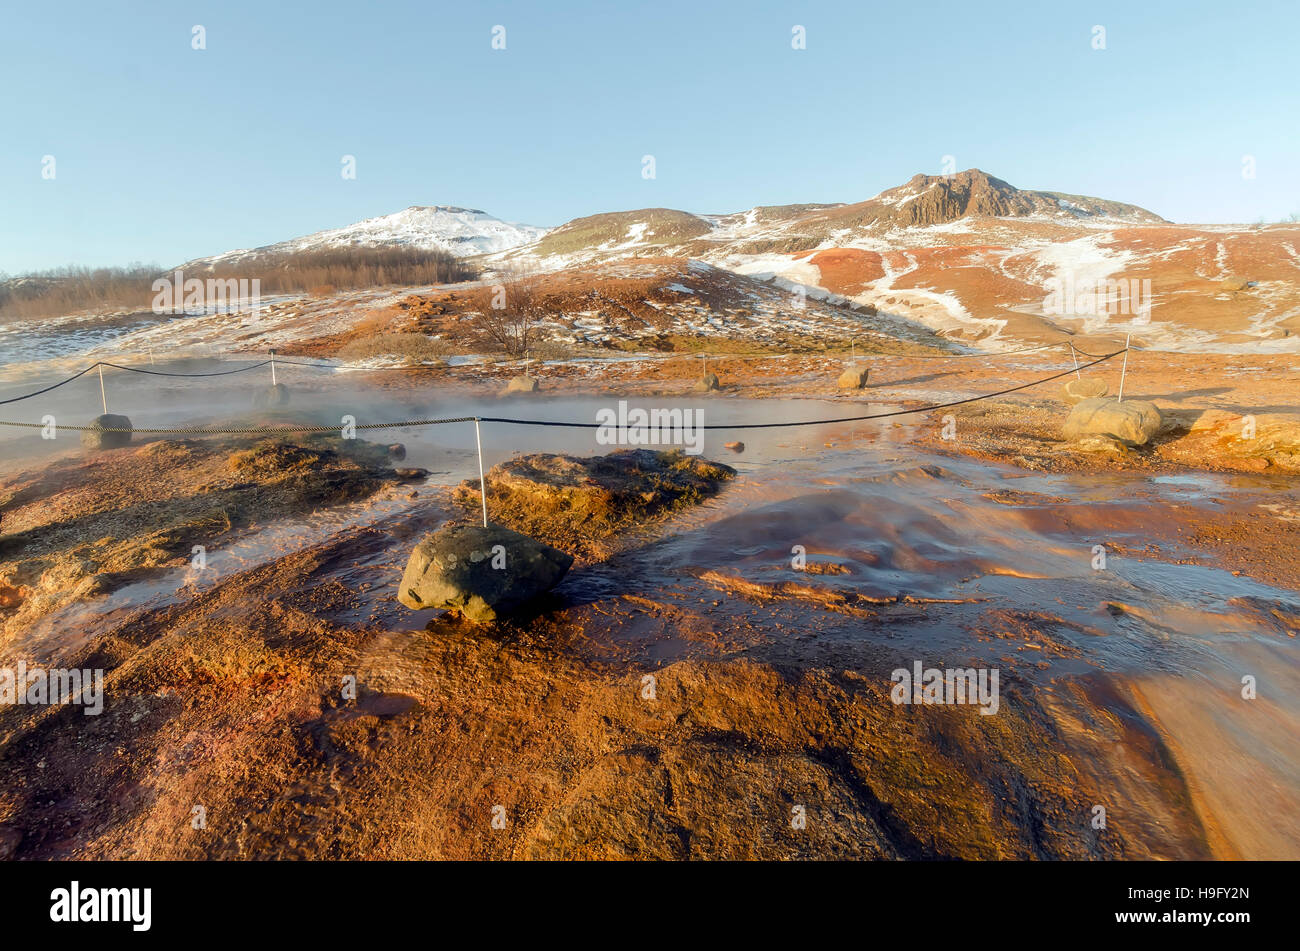 Geysir geothermal area with numerous hot springs, famous landmark attraction Golden Circle Tour Iceland Stock Photo